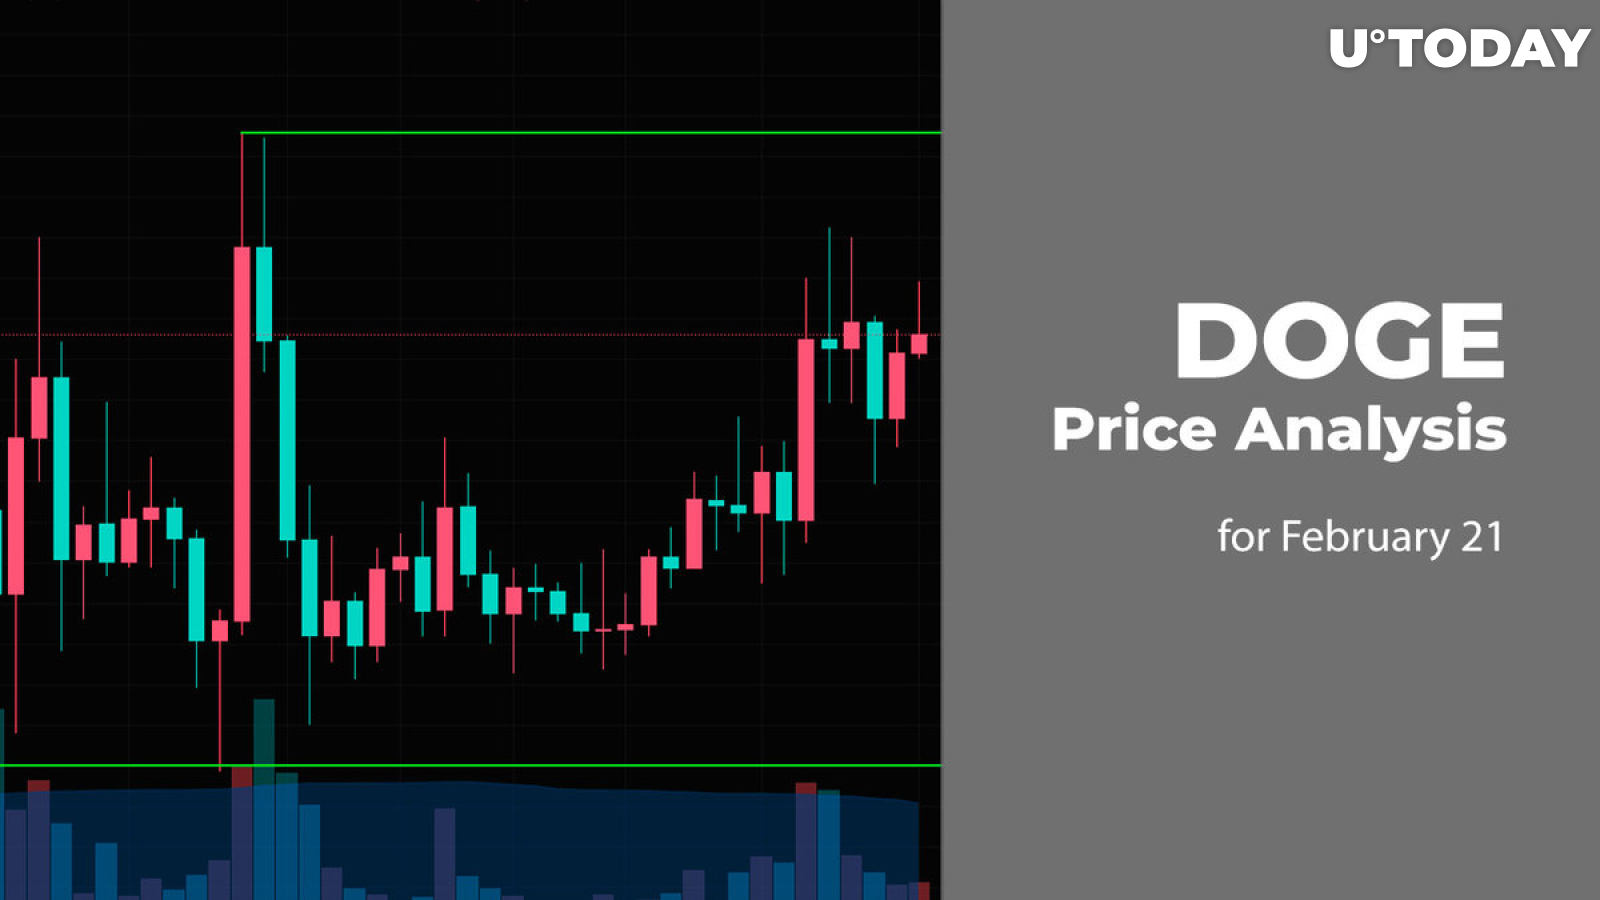 DOGE Price Prediction for February 21